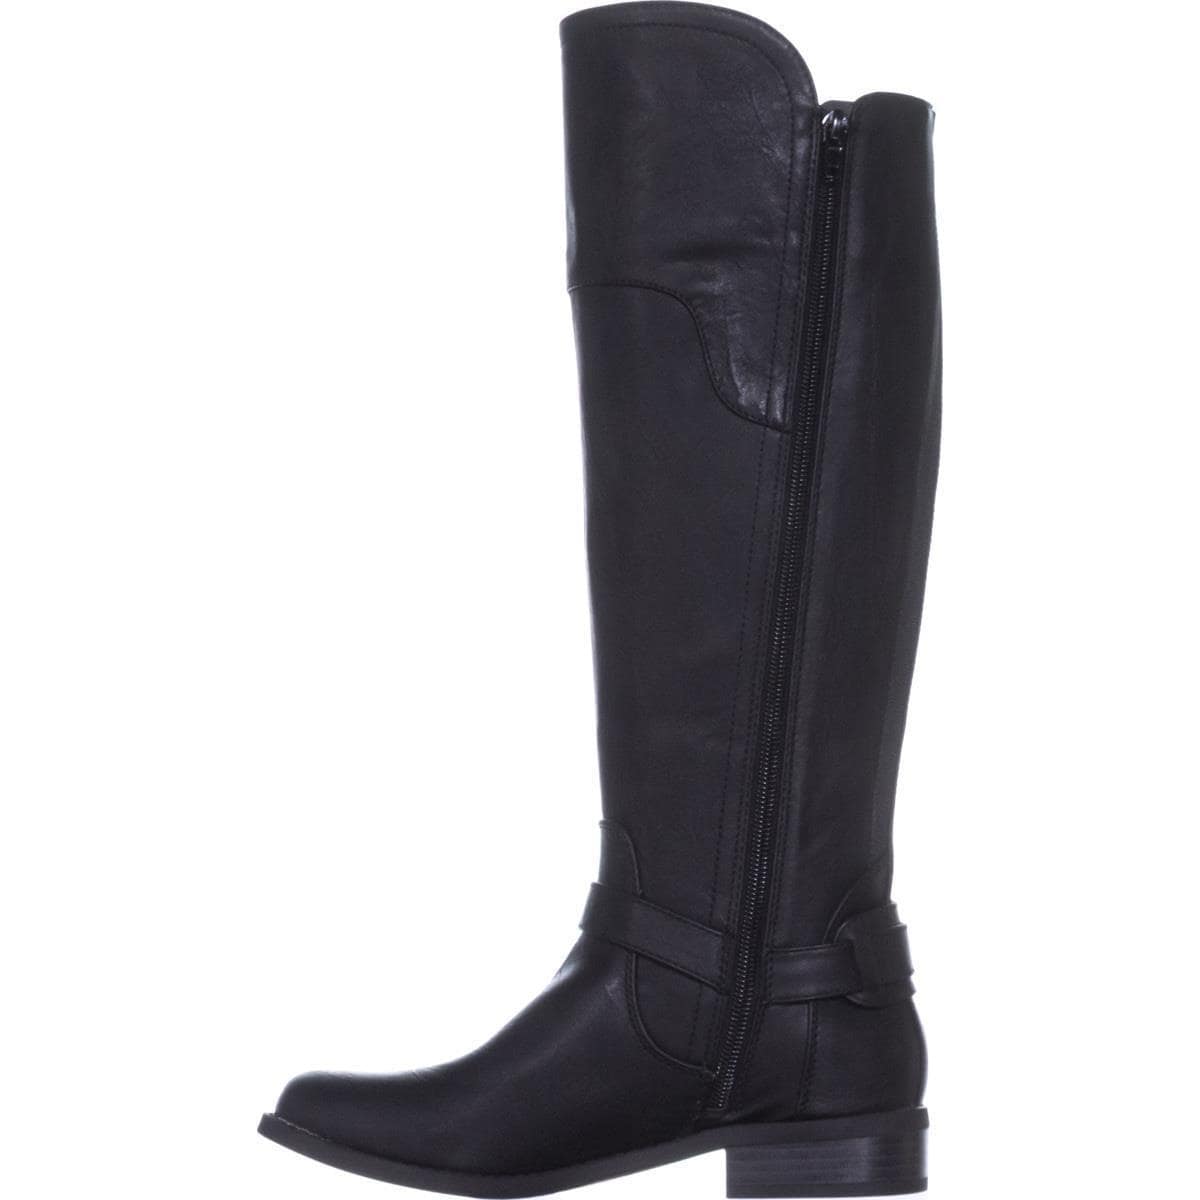 G by Guess Womens Harson5 Closed Toe Knee High Fashion Boots, Black ...